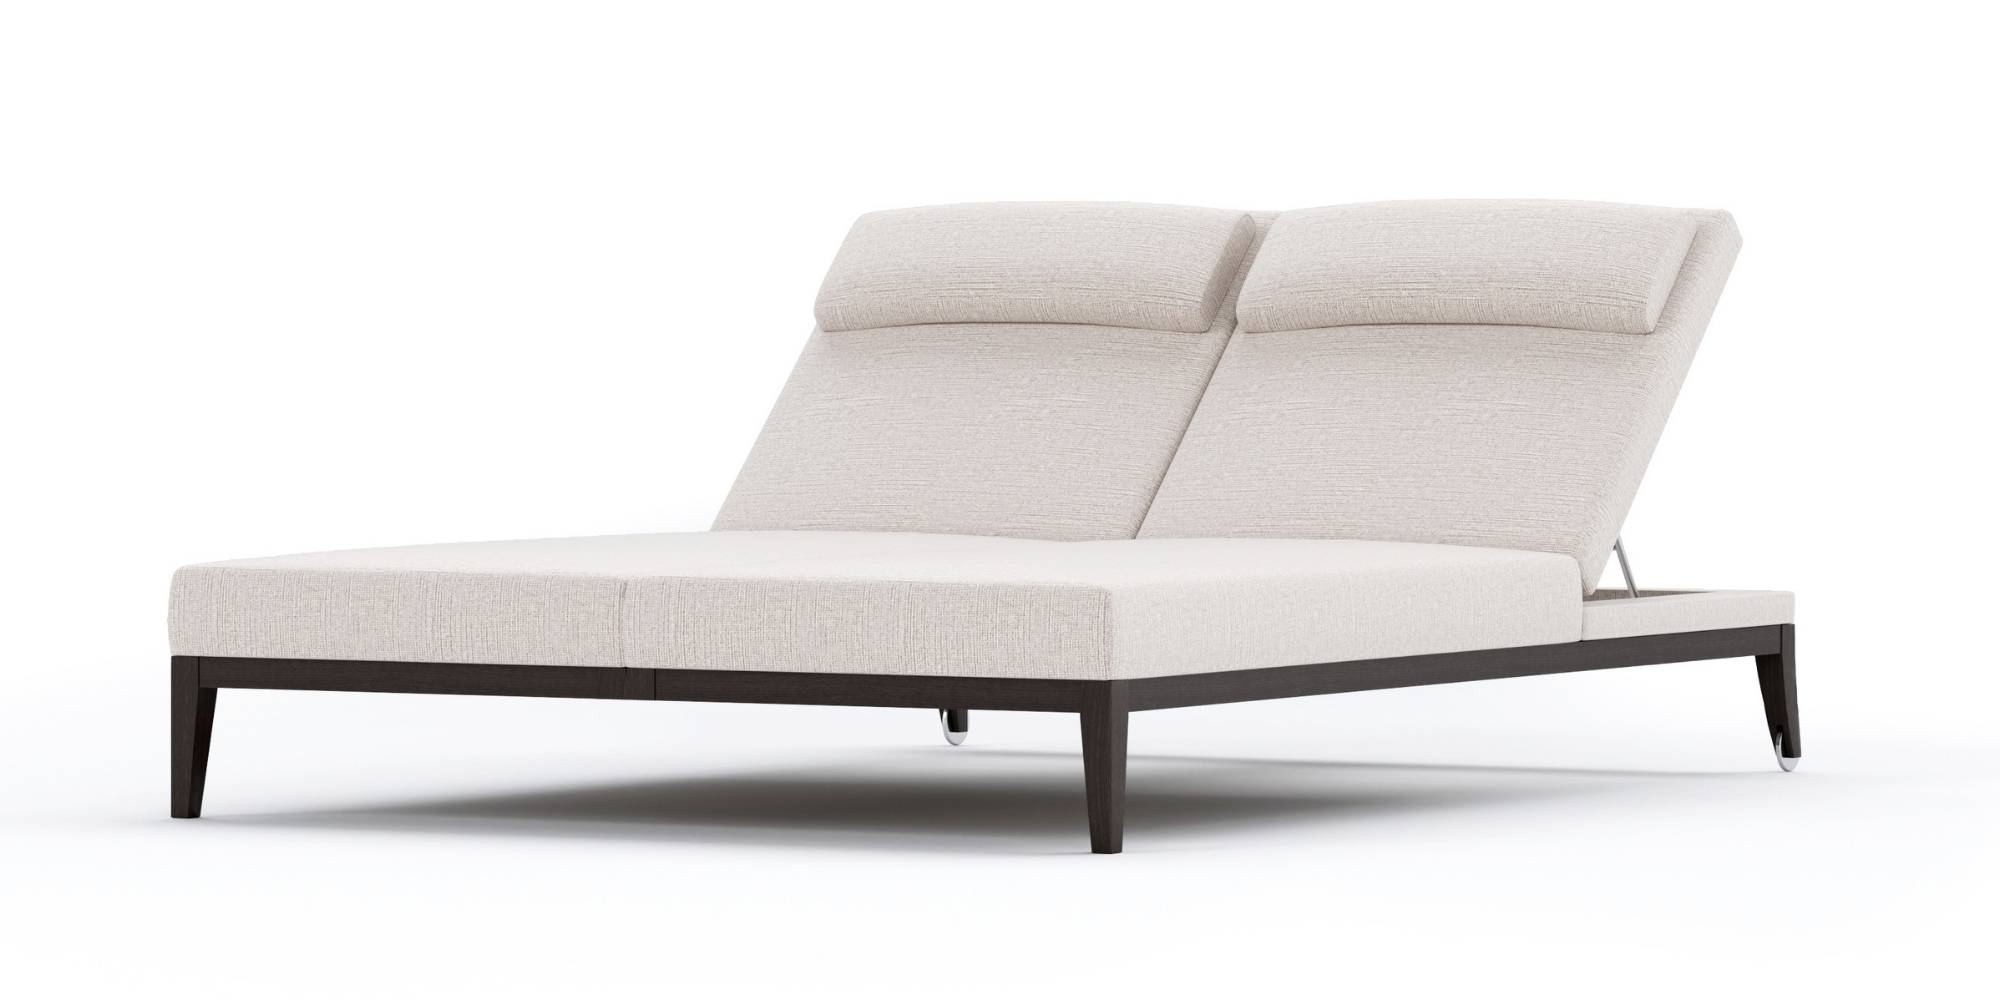 Chuchumber Right Arm End Section in Outdoor Modular Sofas for Chuchumber collection